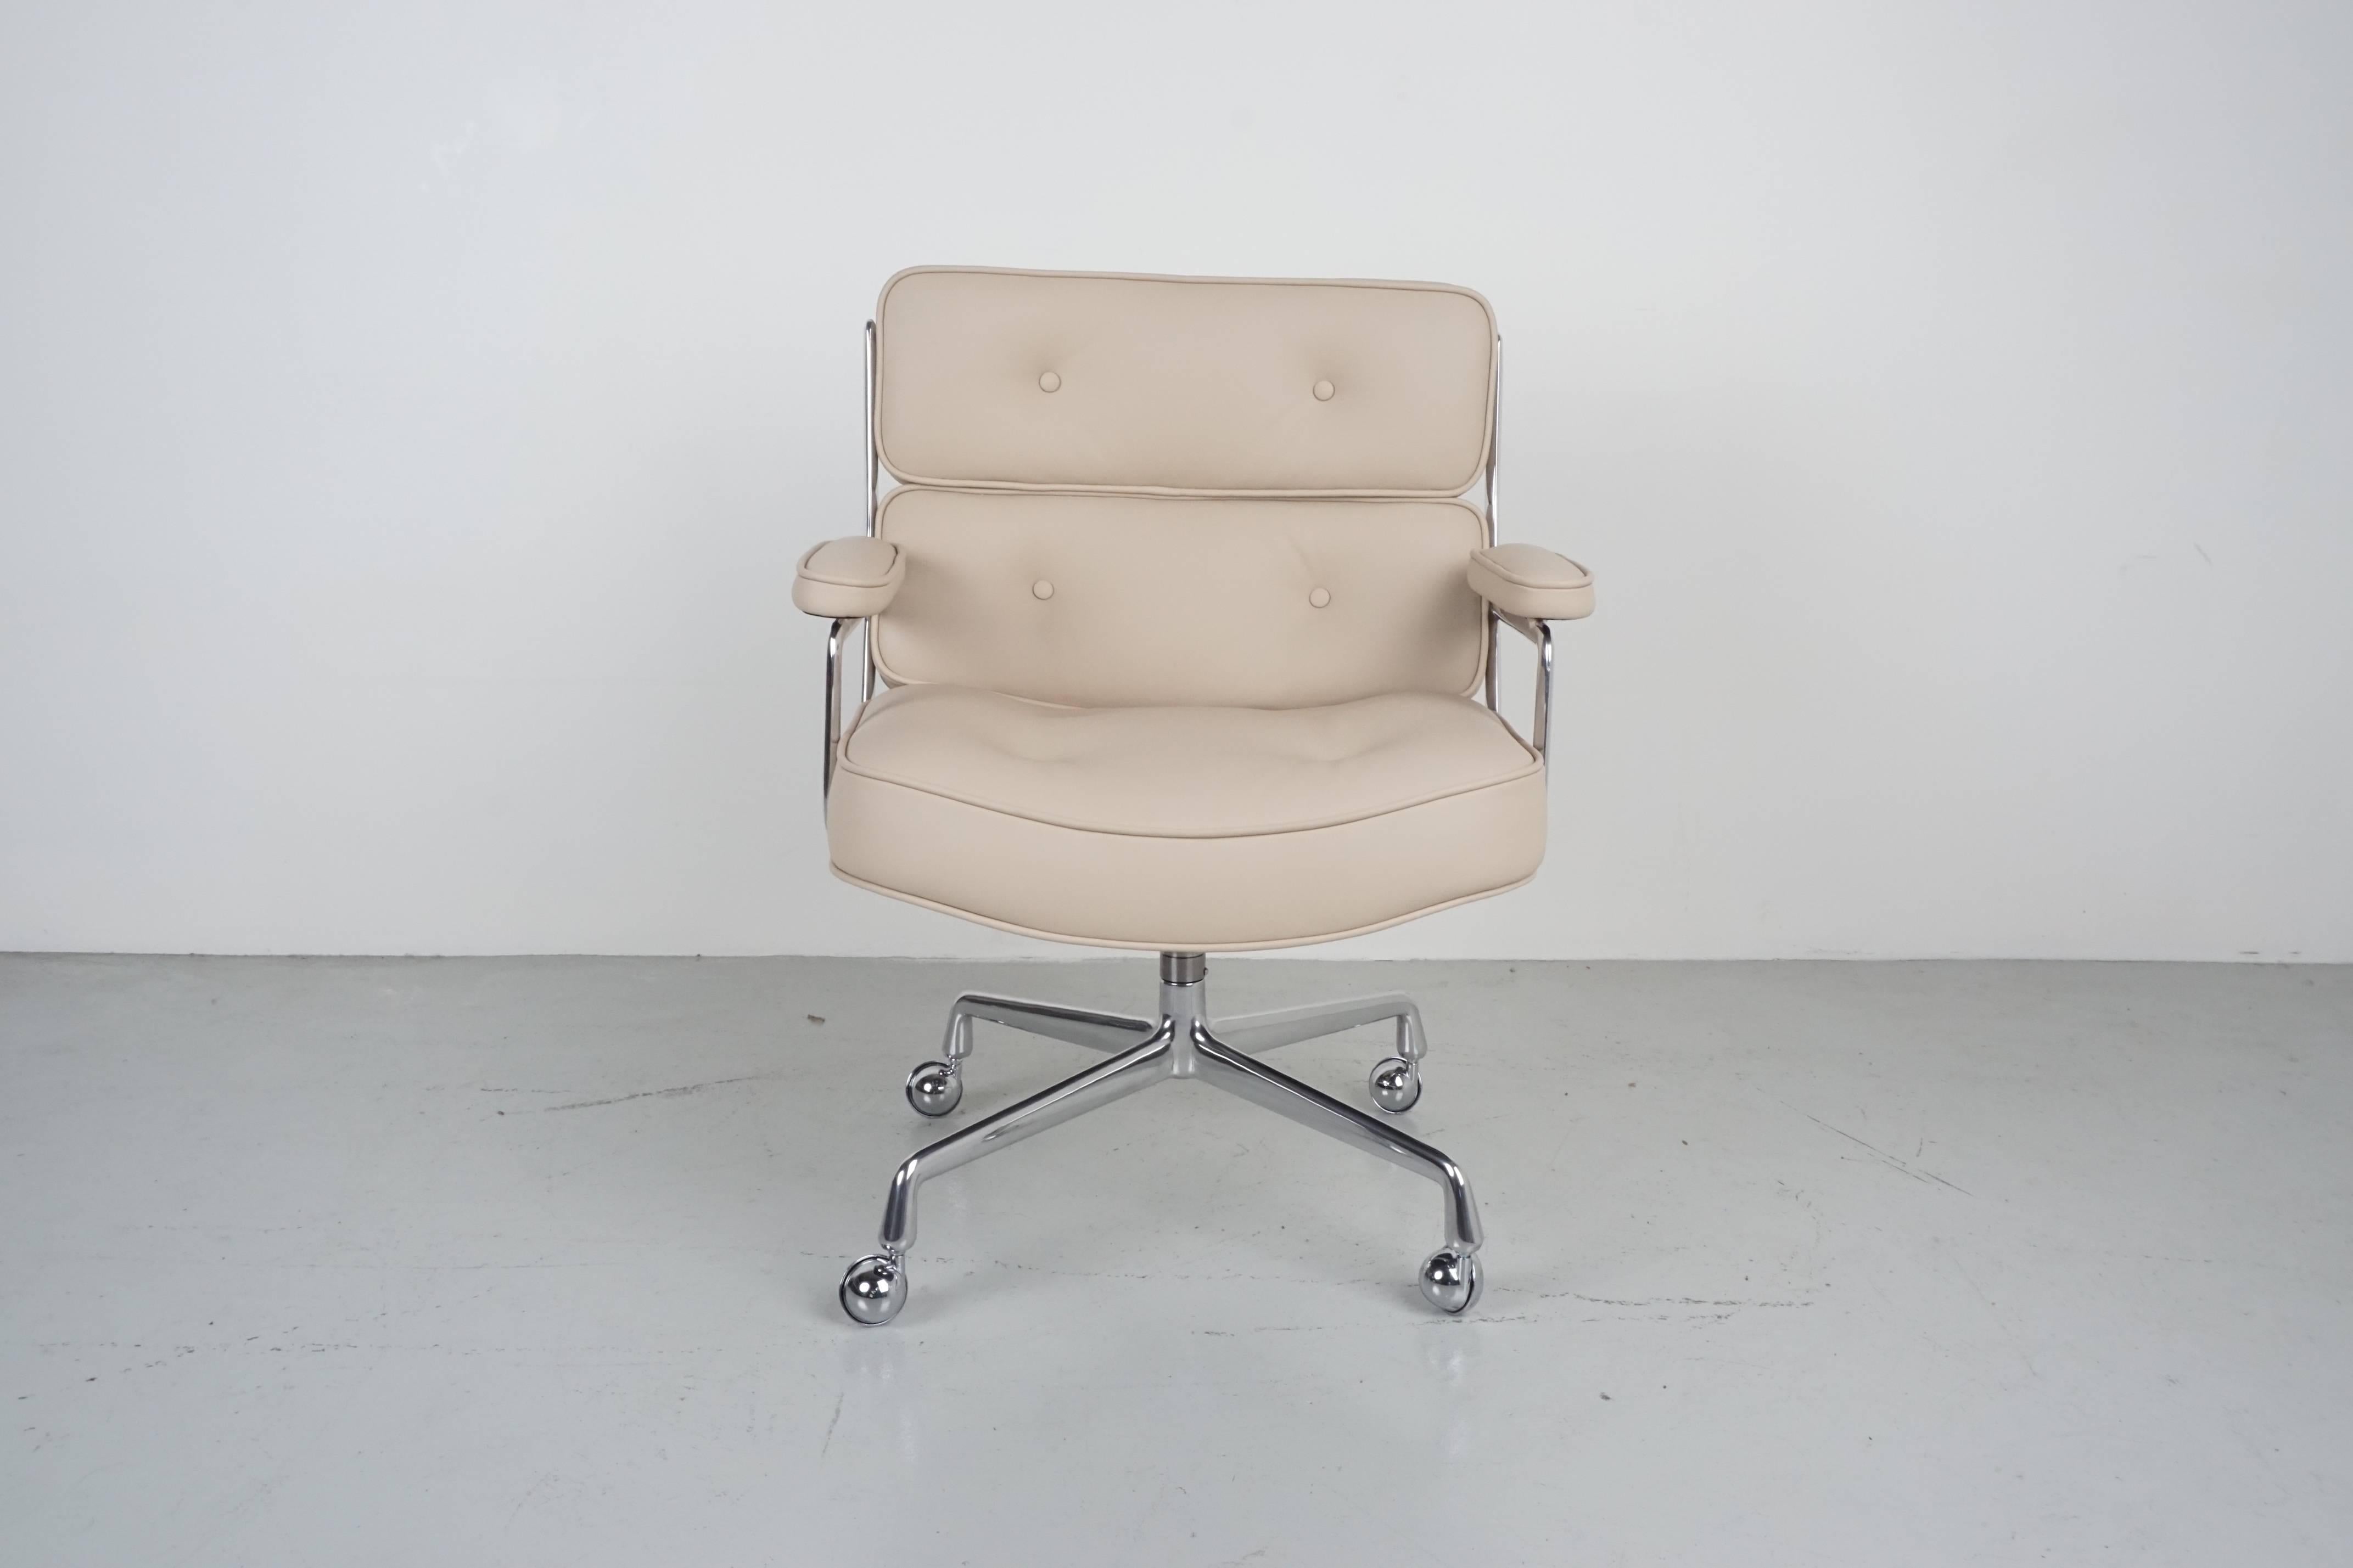 Eames time life chair reupholstered in cream colored leather. Newly polished aluminum base and casters. Chair tilts, swivels and goes up and down.